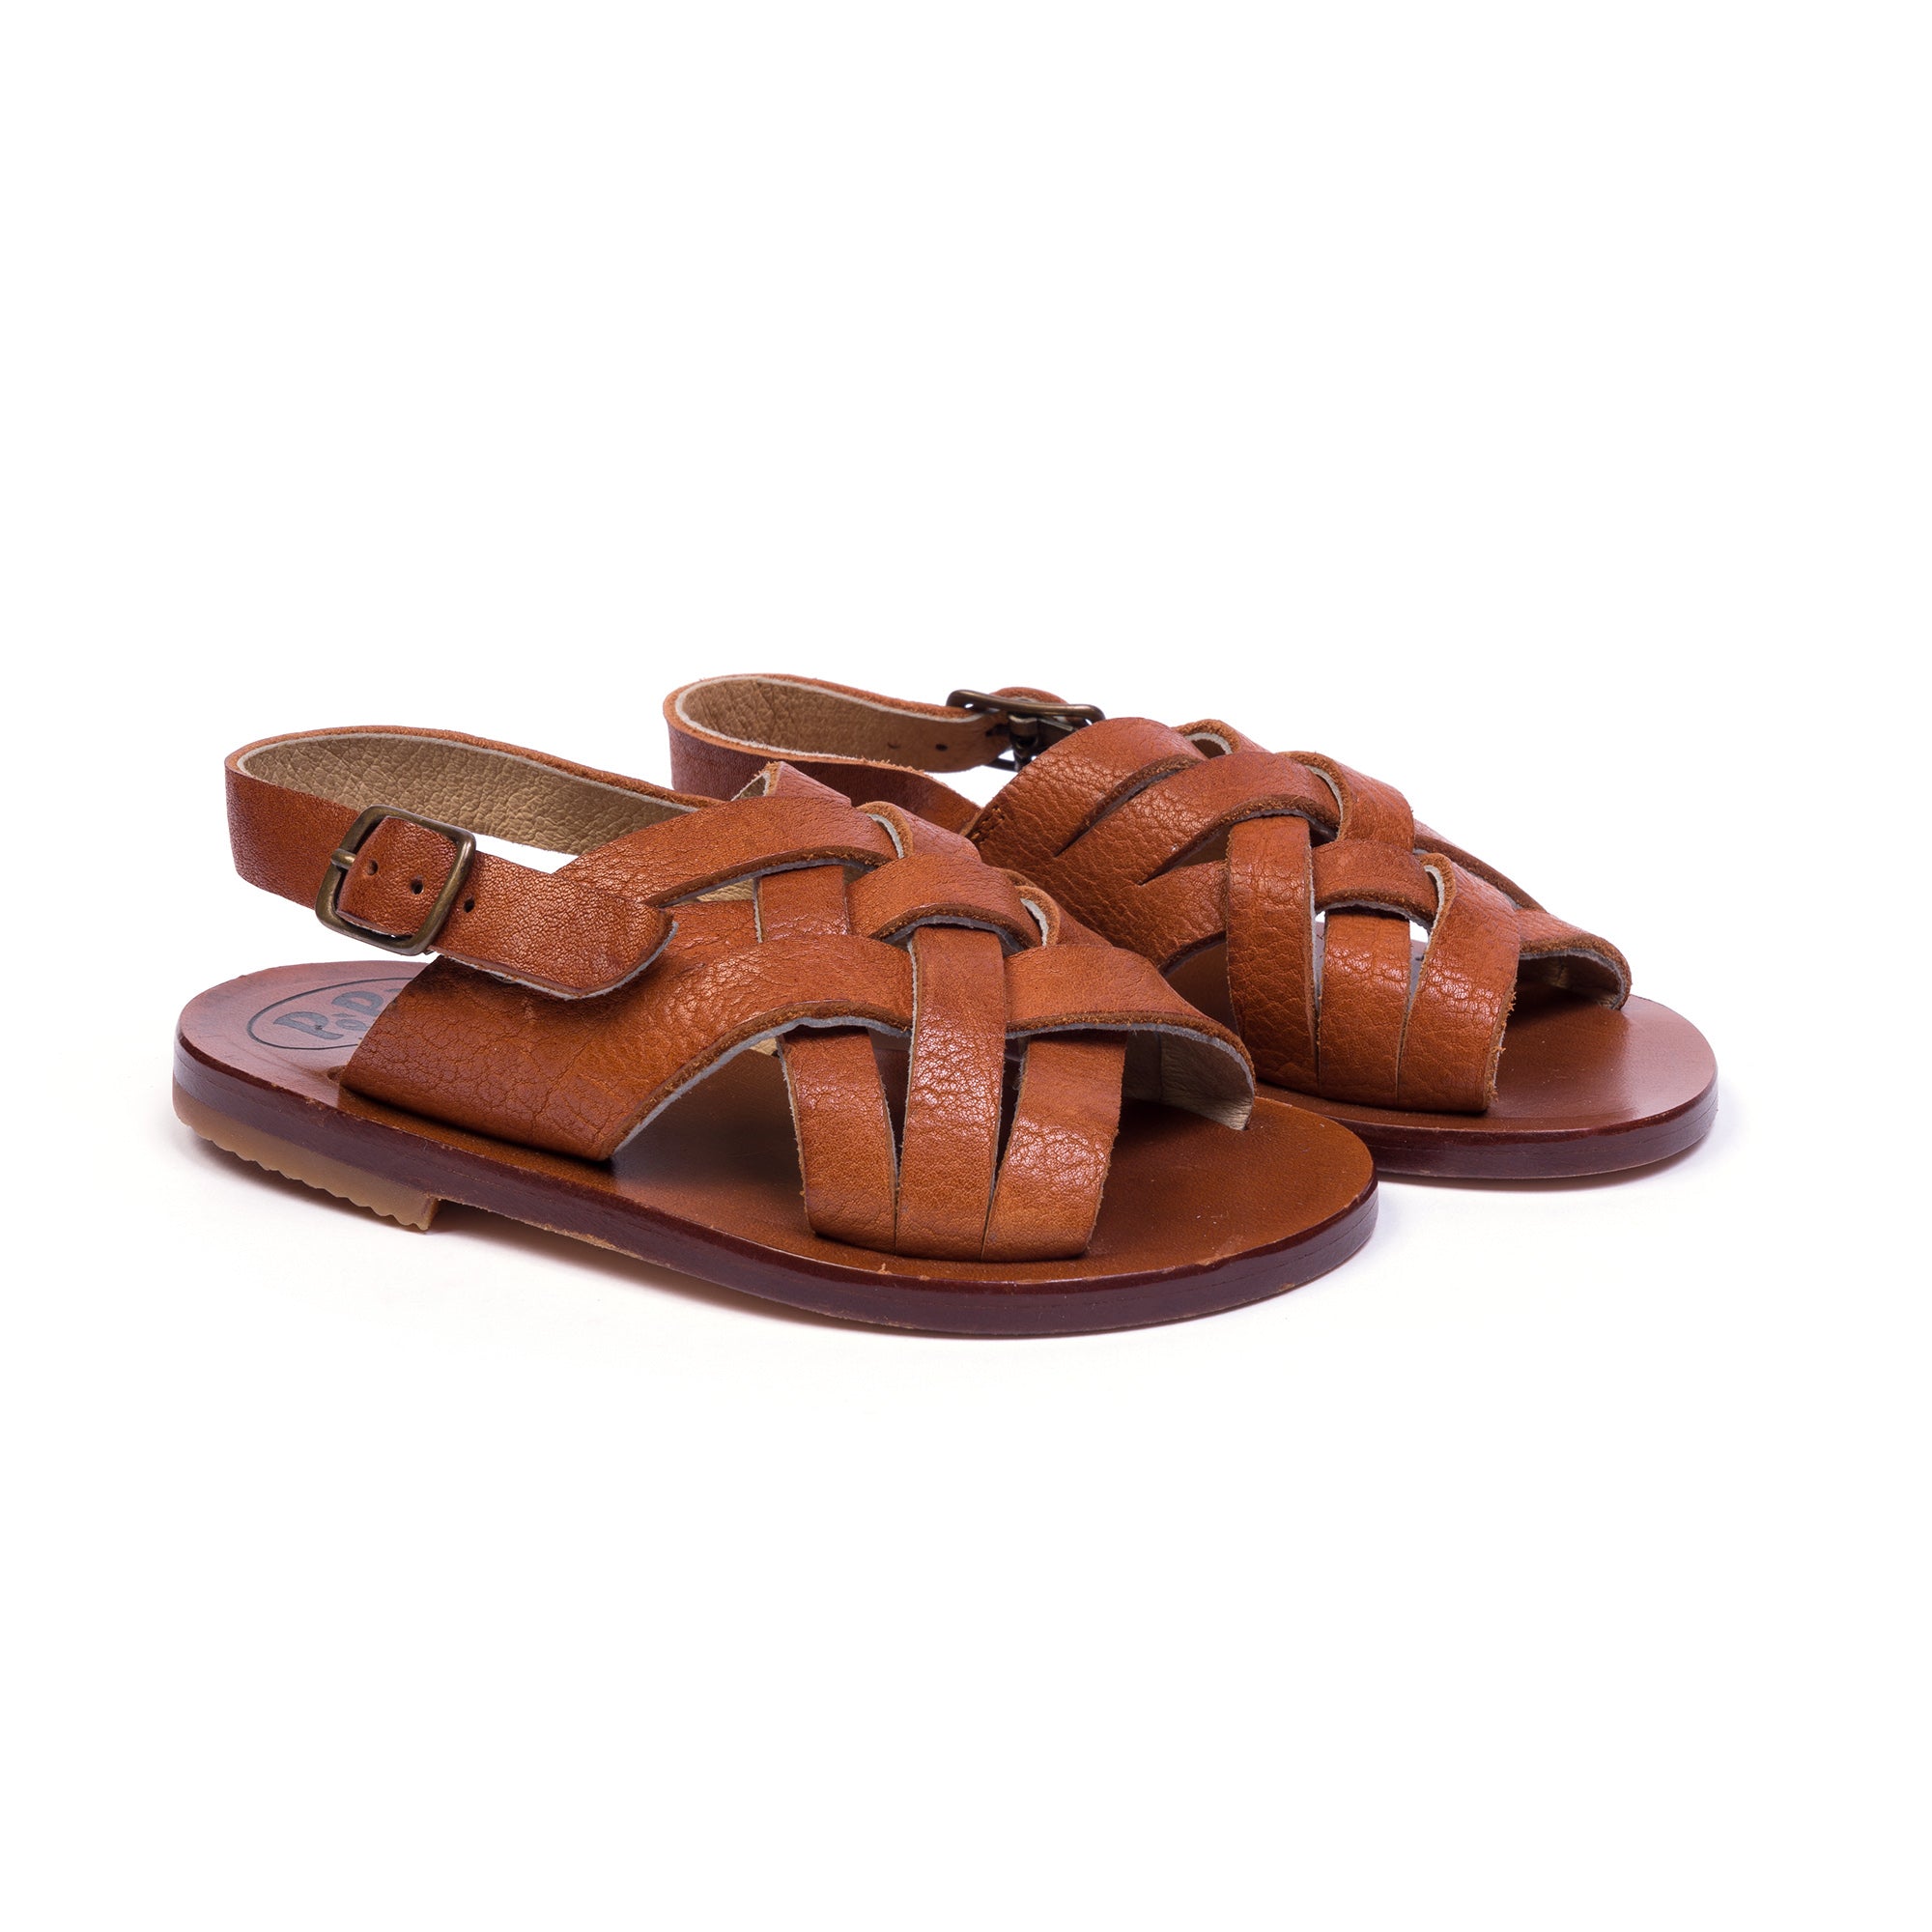 Boys & Girls Brown Leather Sandals